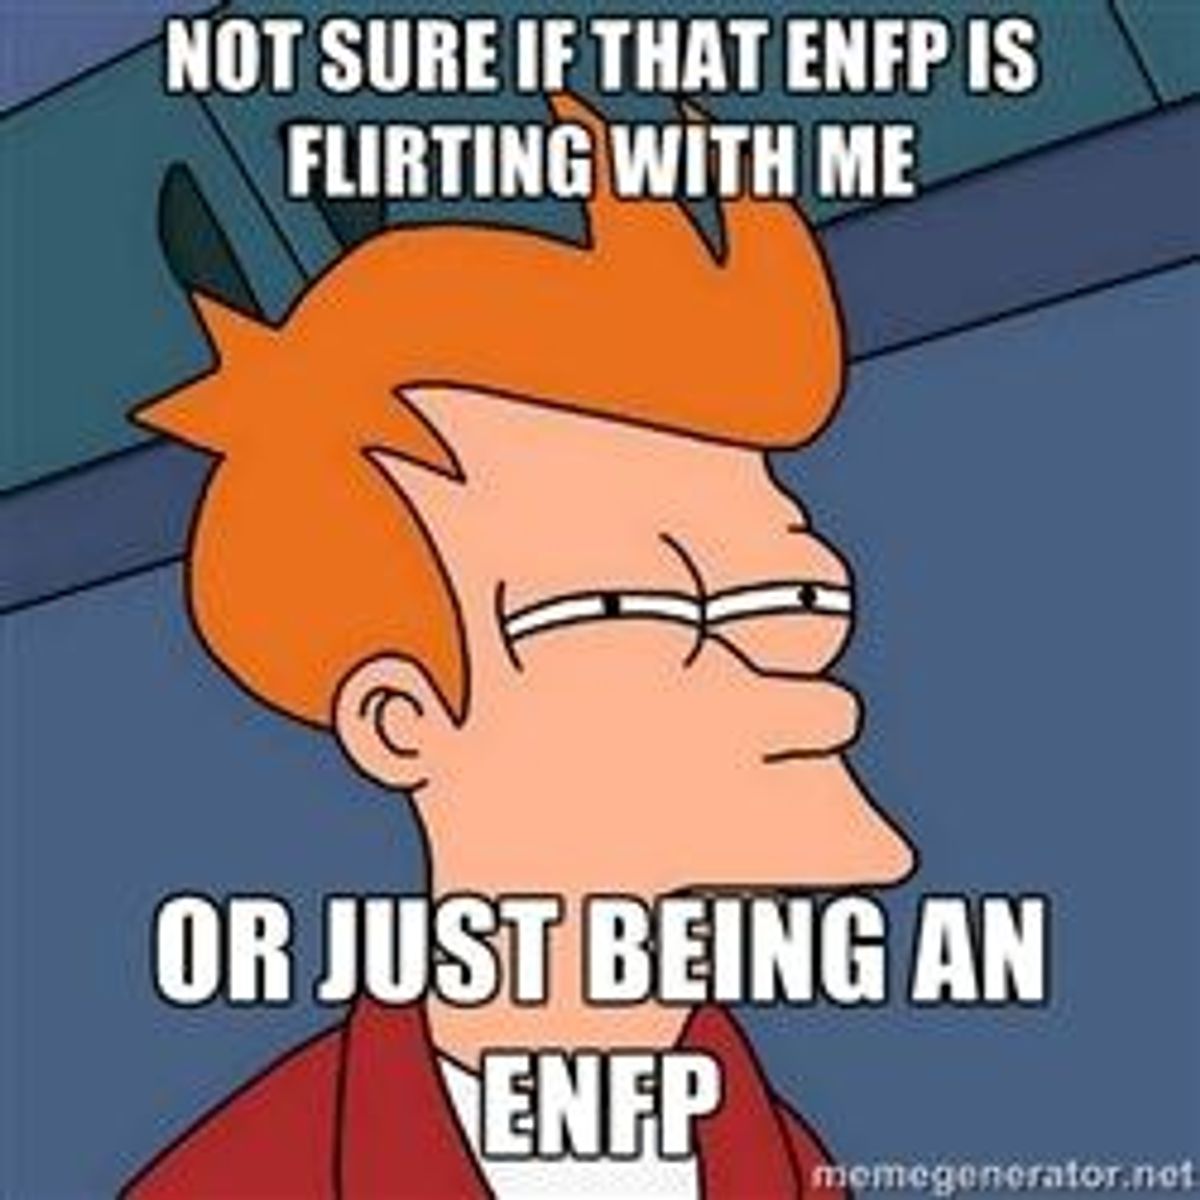 10 Tell-Tale Signs You're An ENFP Personality Type